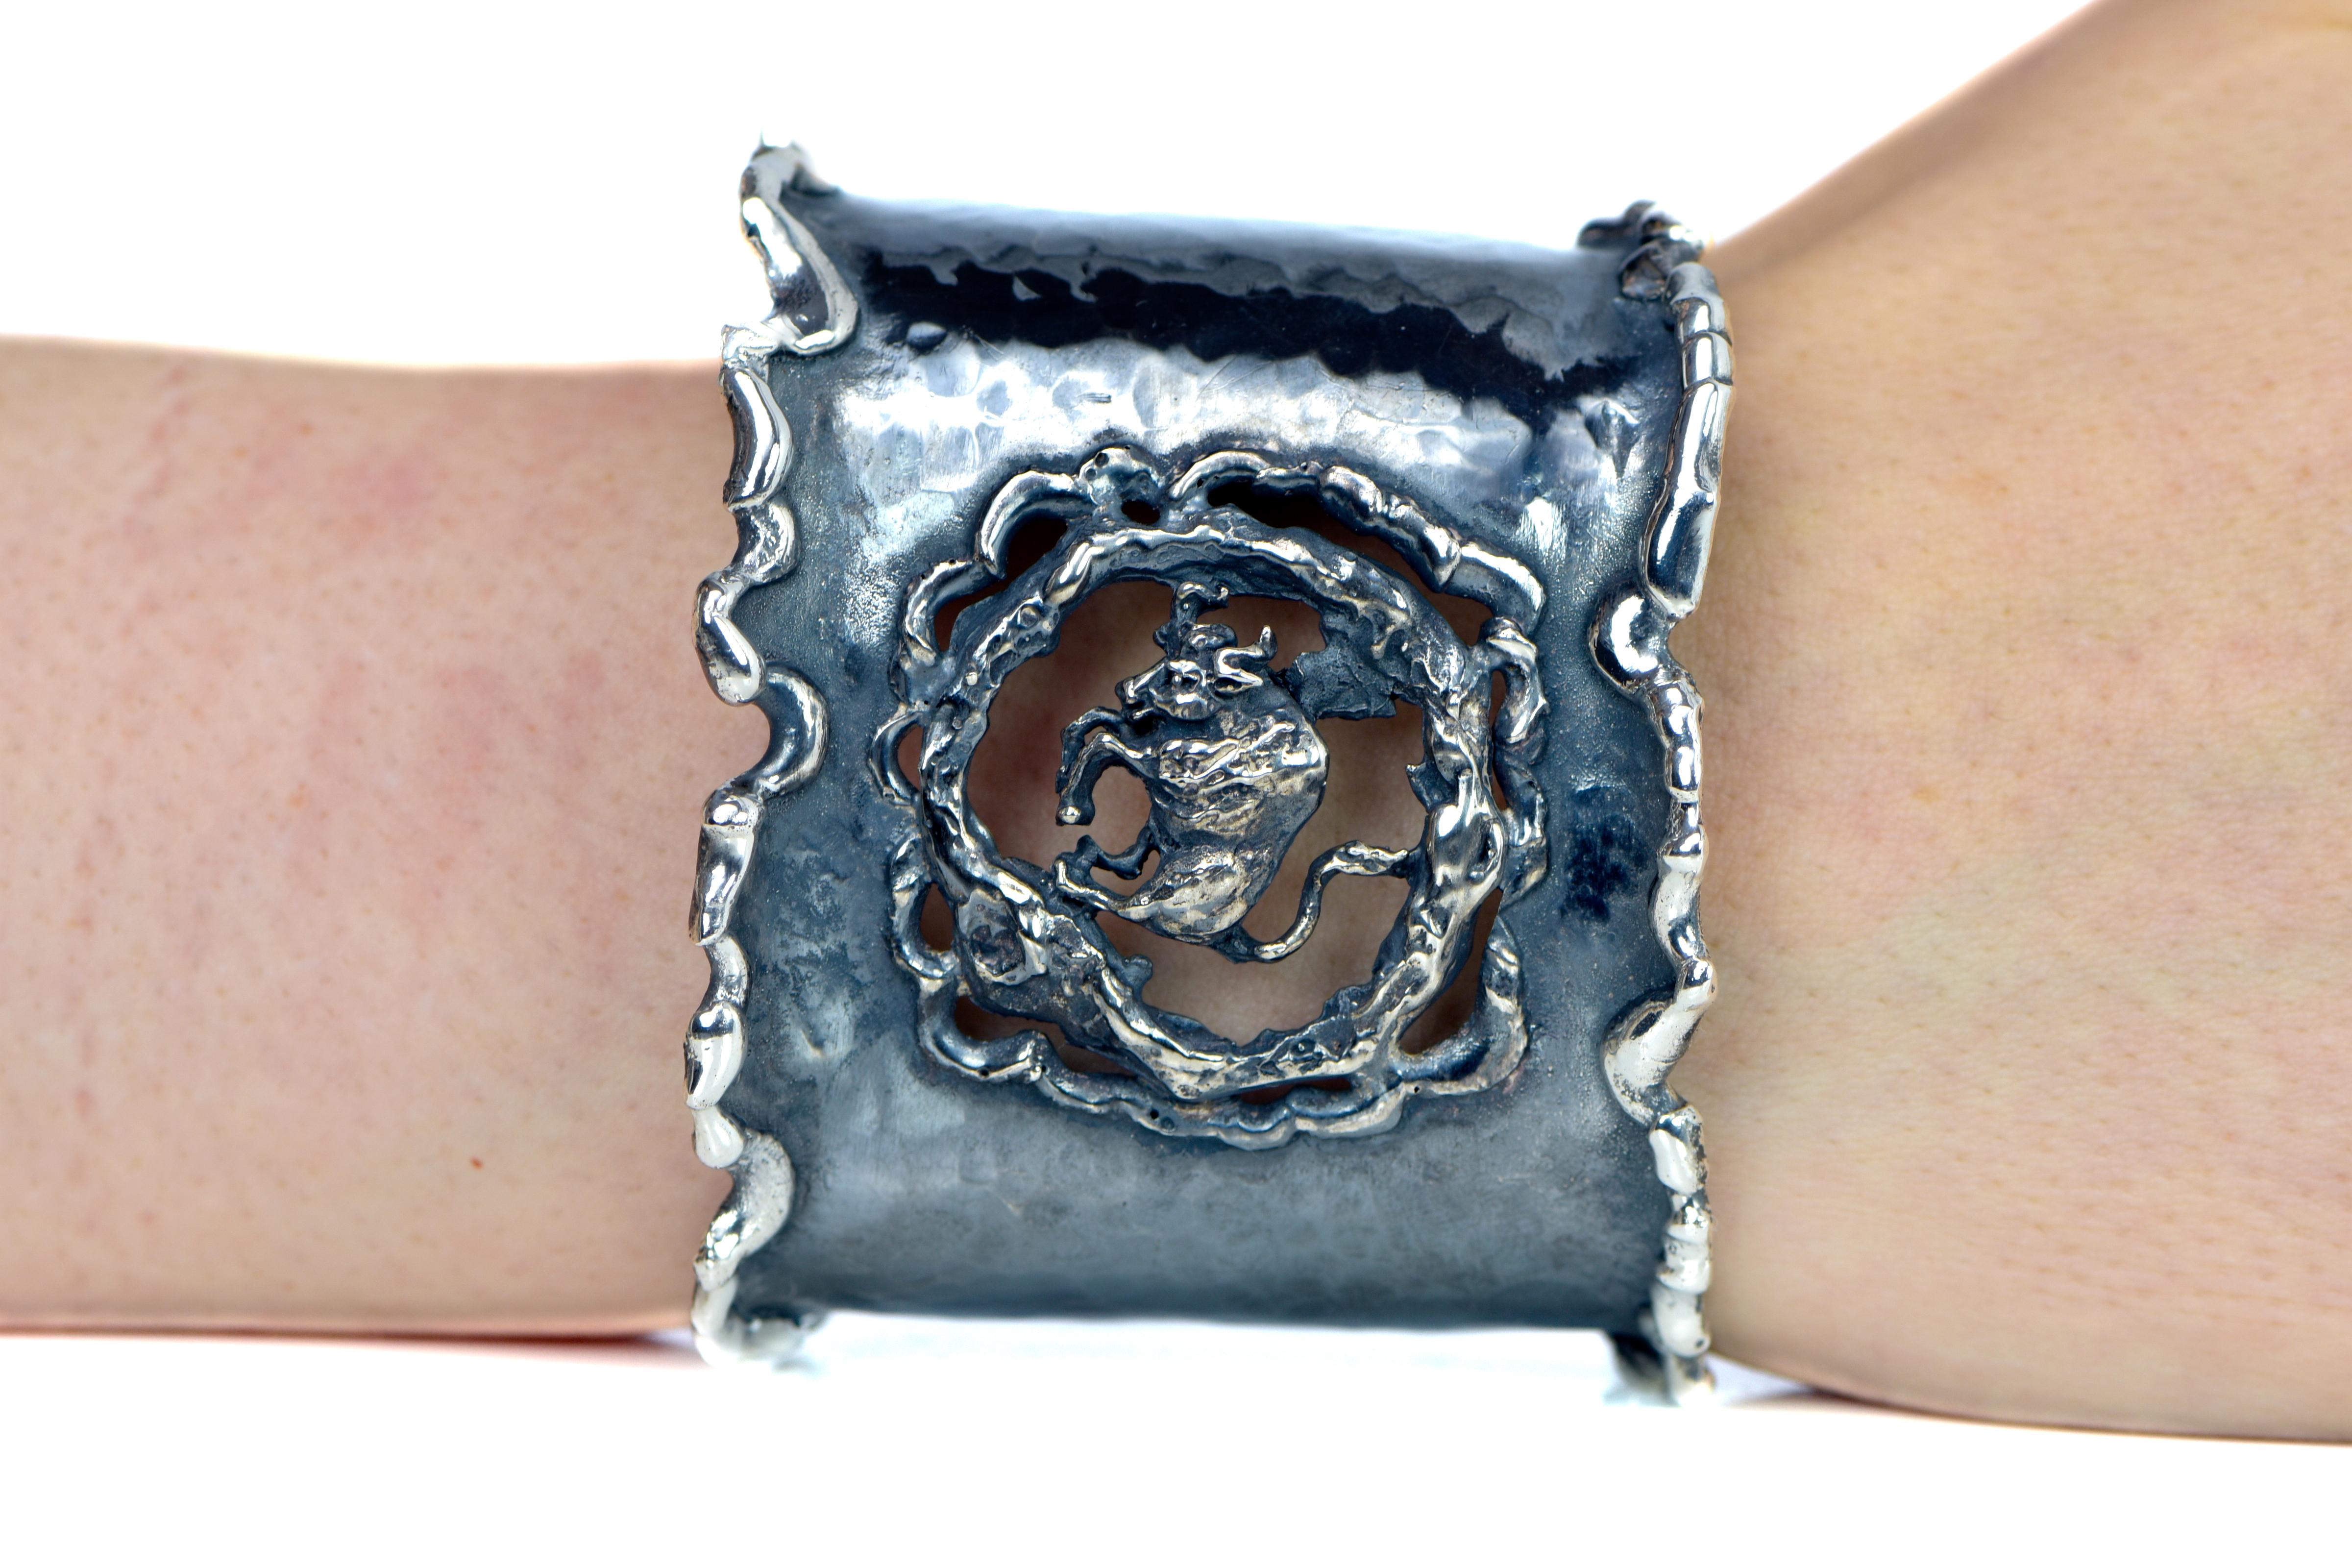  Hand Forged Silver Taurus Adjustable Cuff Bracelet. About 2.5 inches wide. The metal does not contain any additional alloys that could compromise the strength or quality of the piece. Each Organic Silver Cuff Bracelet takes about 8 hours to